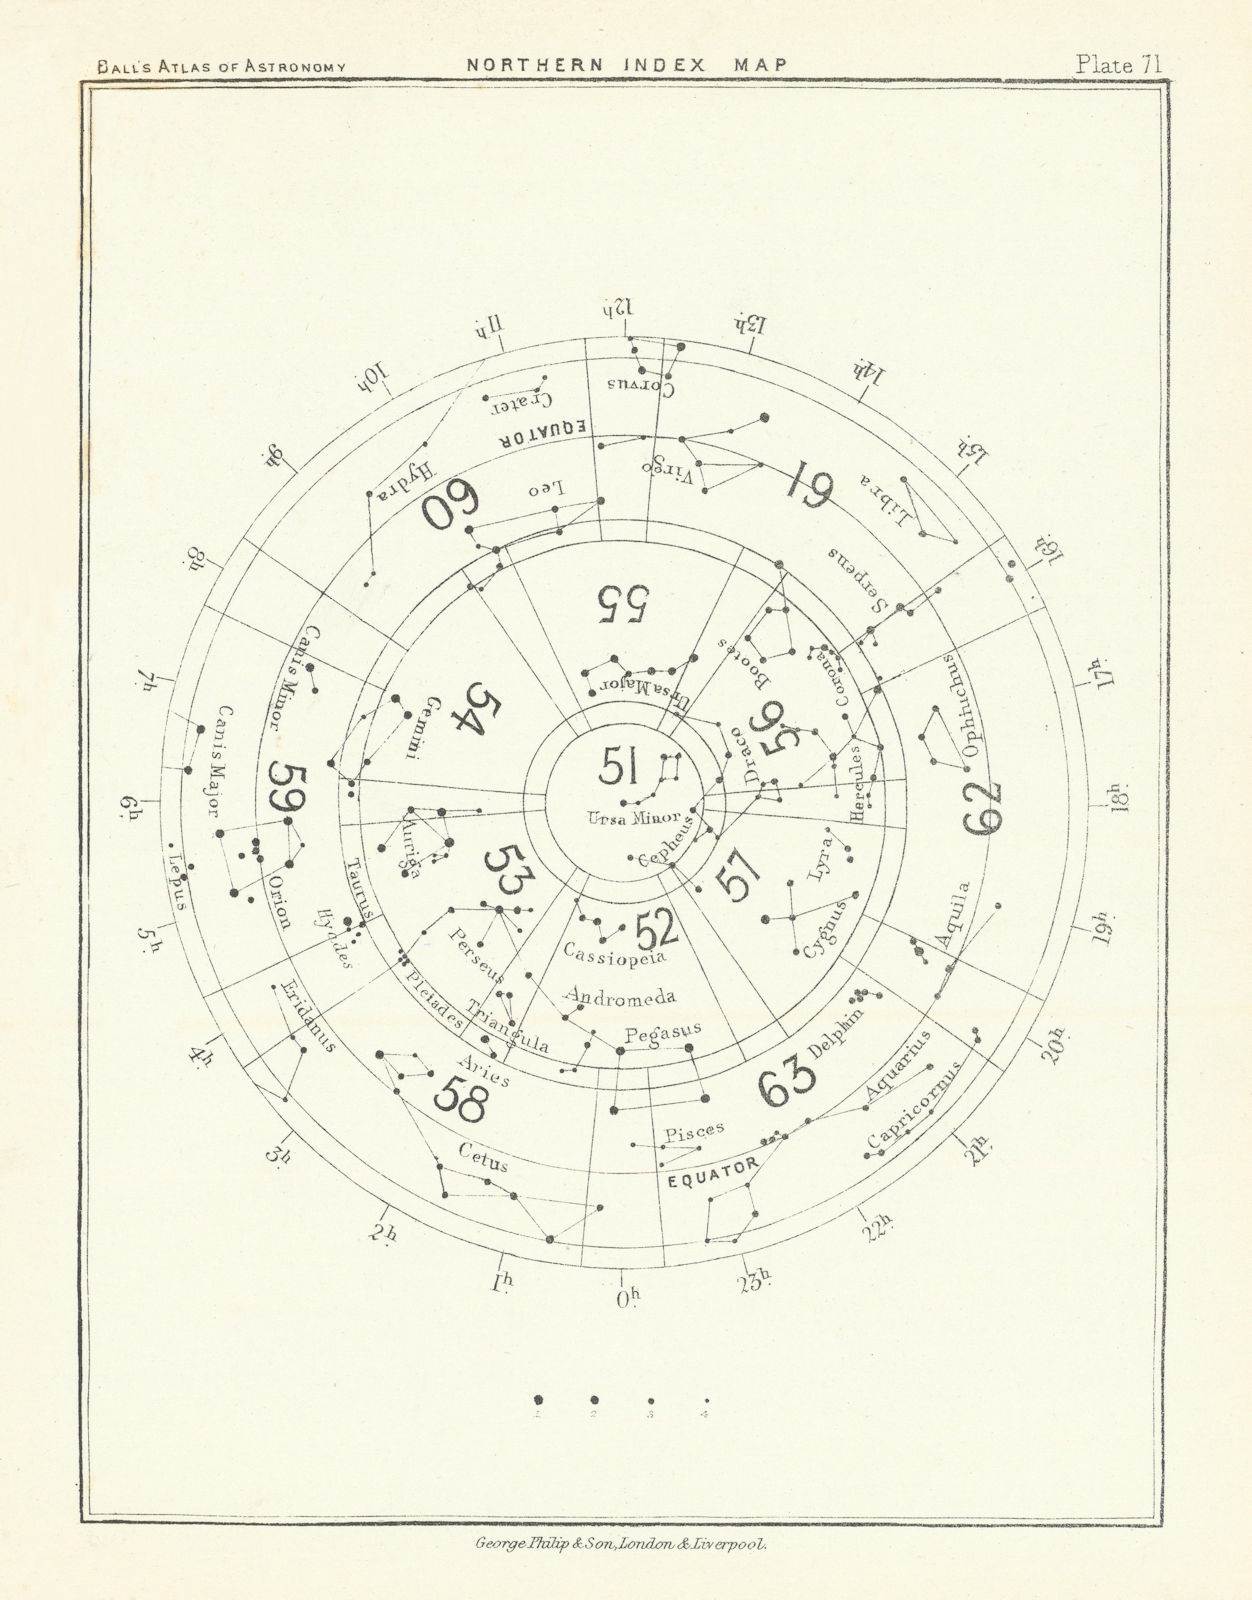 Associate Product Night Sky Star Chart. Northern Index Map by Robert Ball. Astronomy 1892